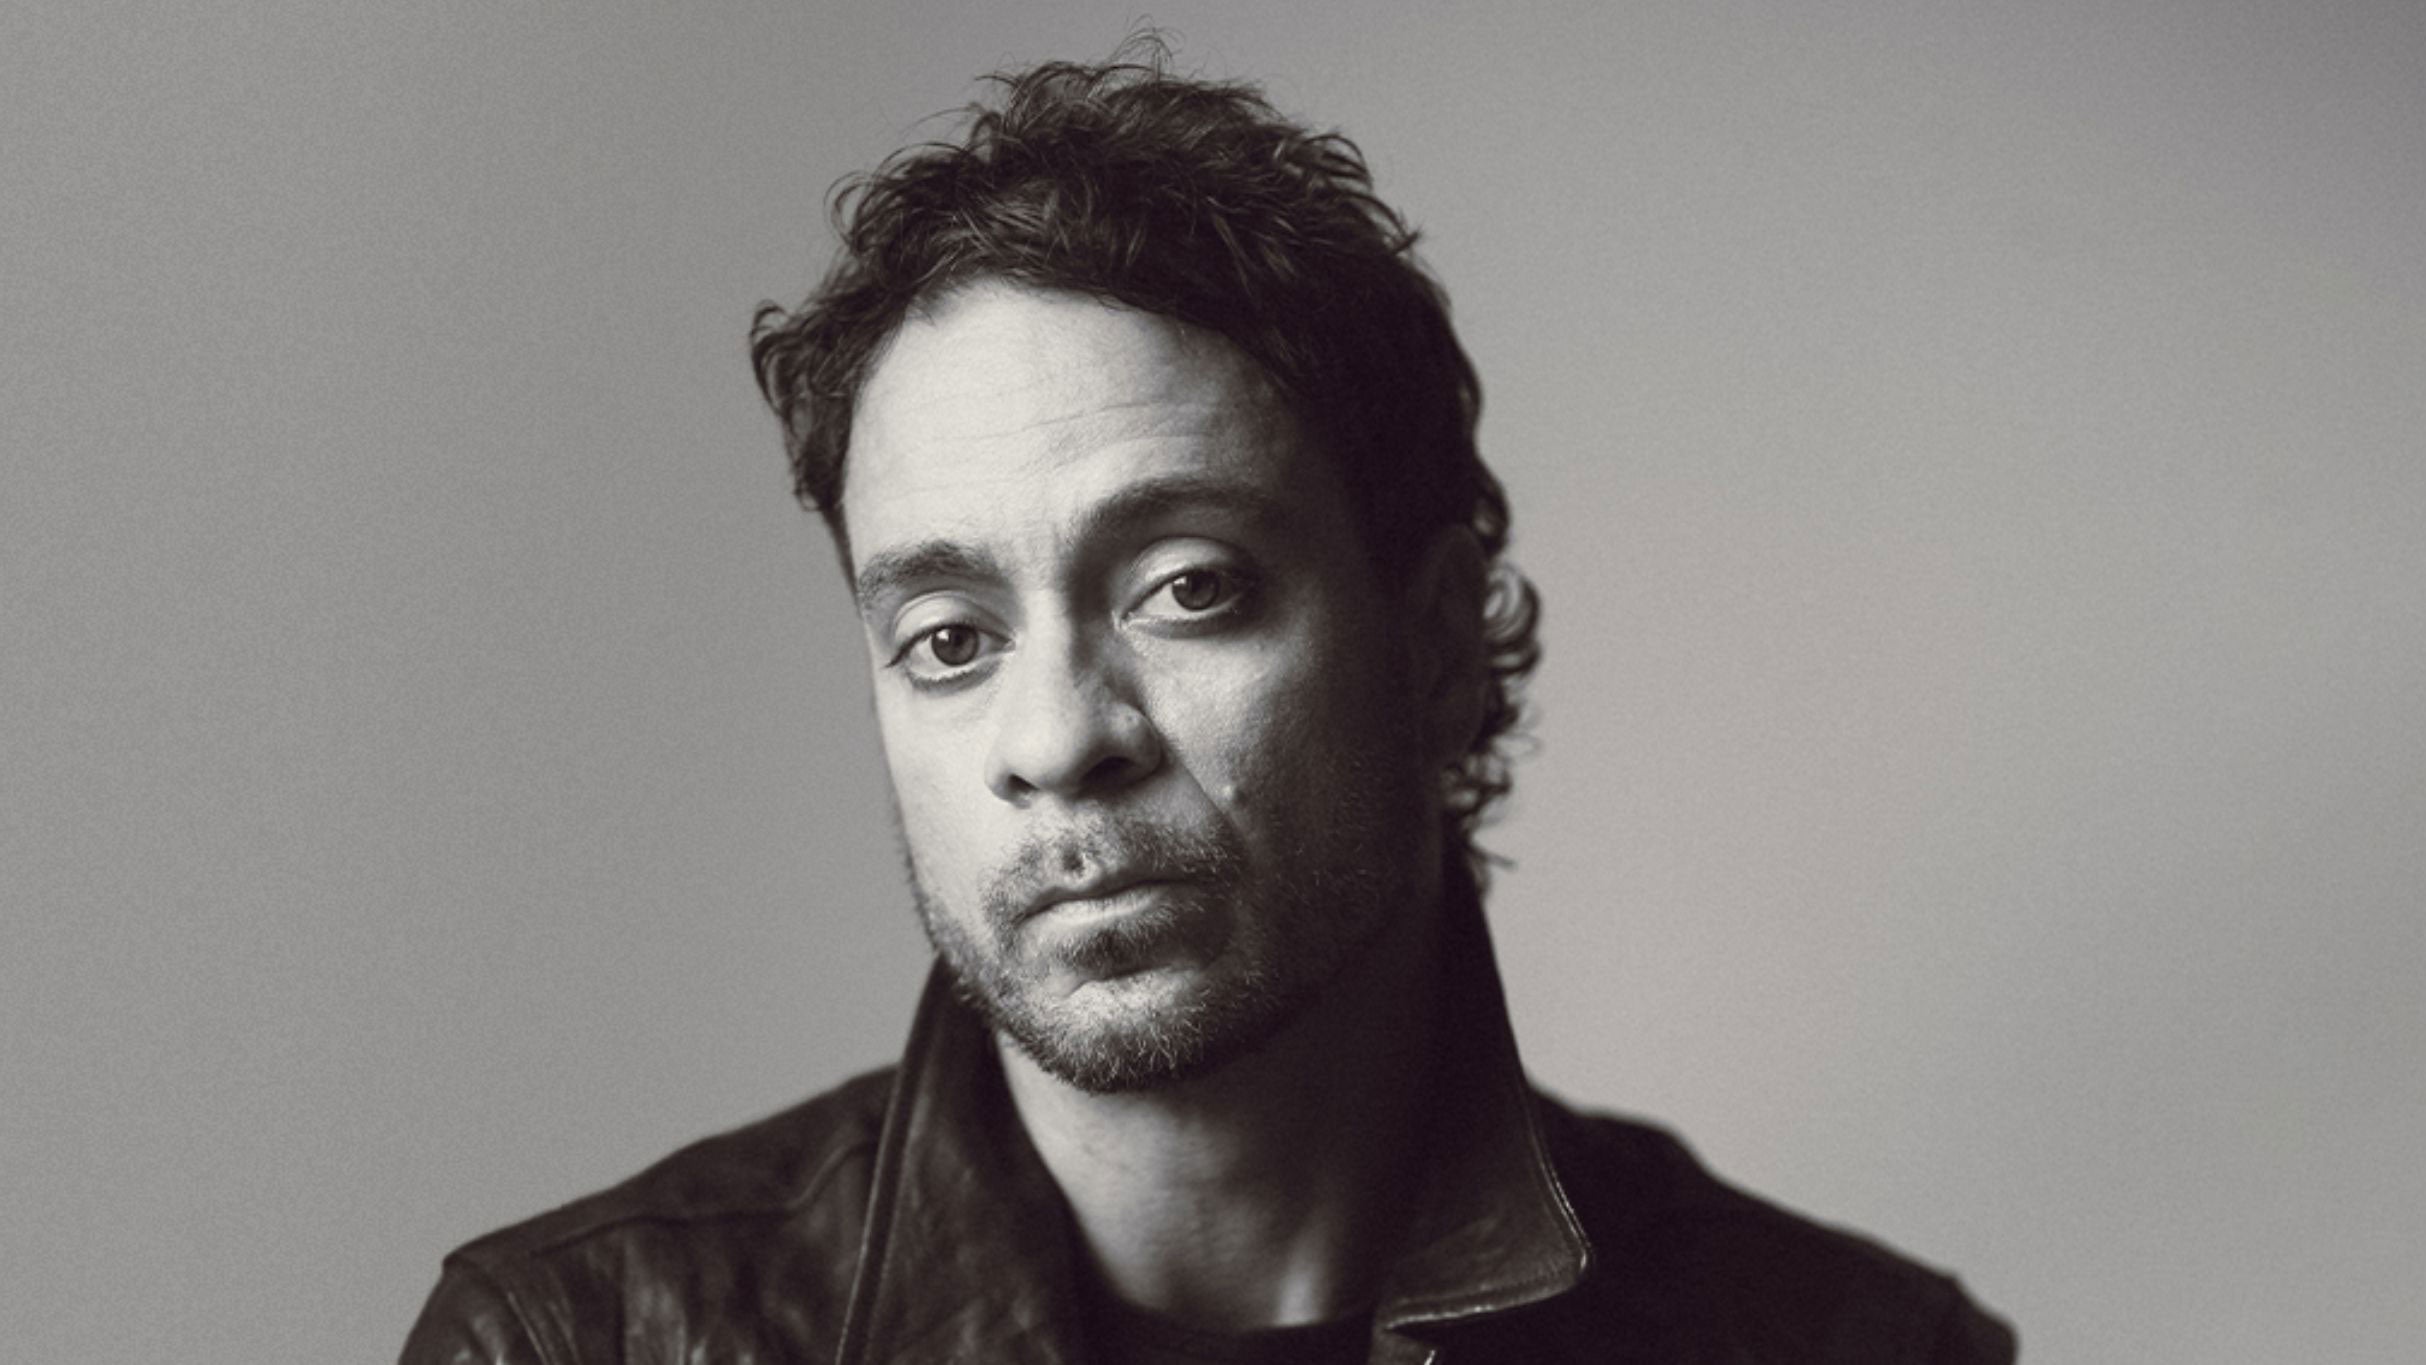 Amos Lee free presale password for early tickets in Des Moines